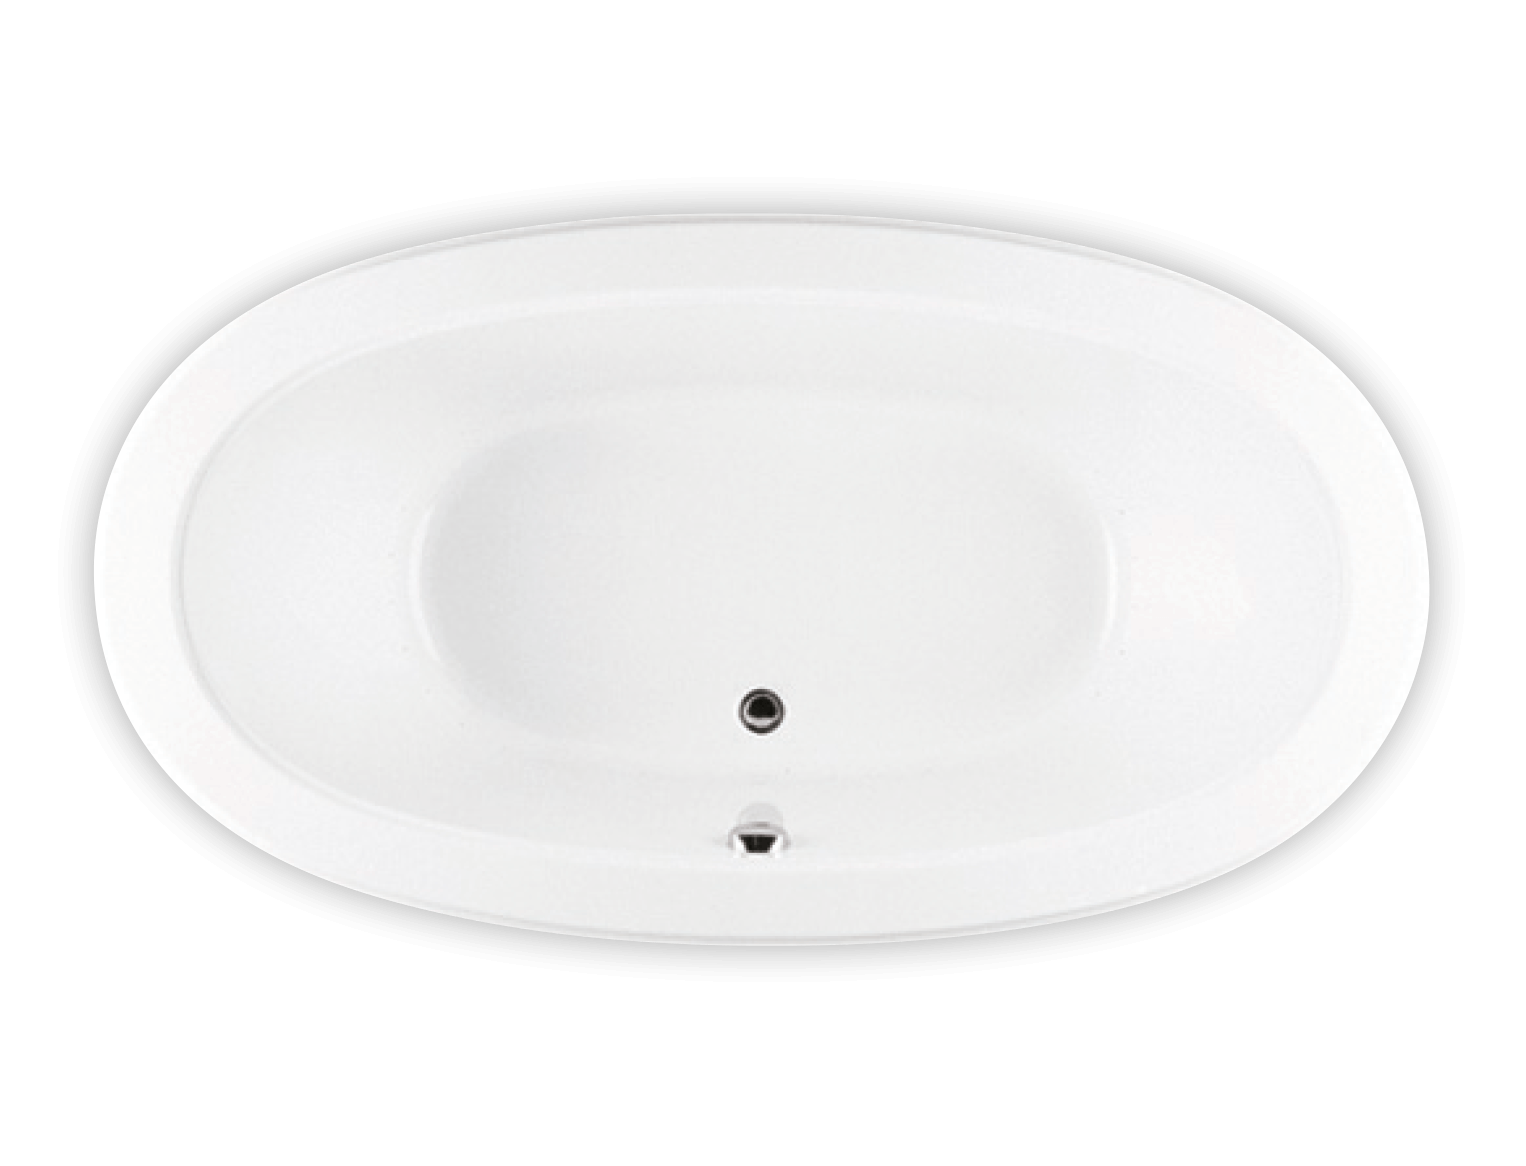 Bainultra Ellipse® 7240 two person large air jet bathtub for your modern bathroom